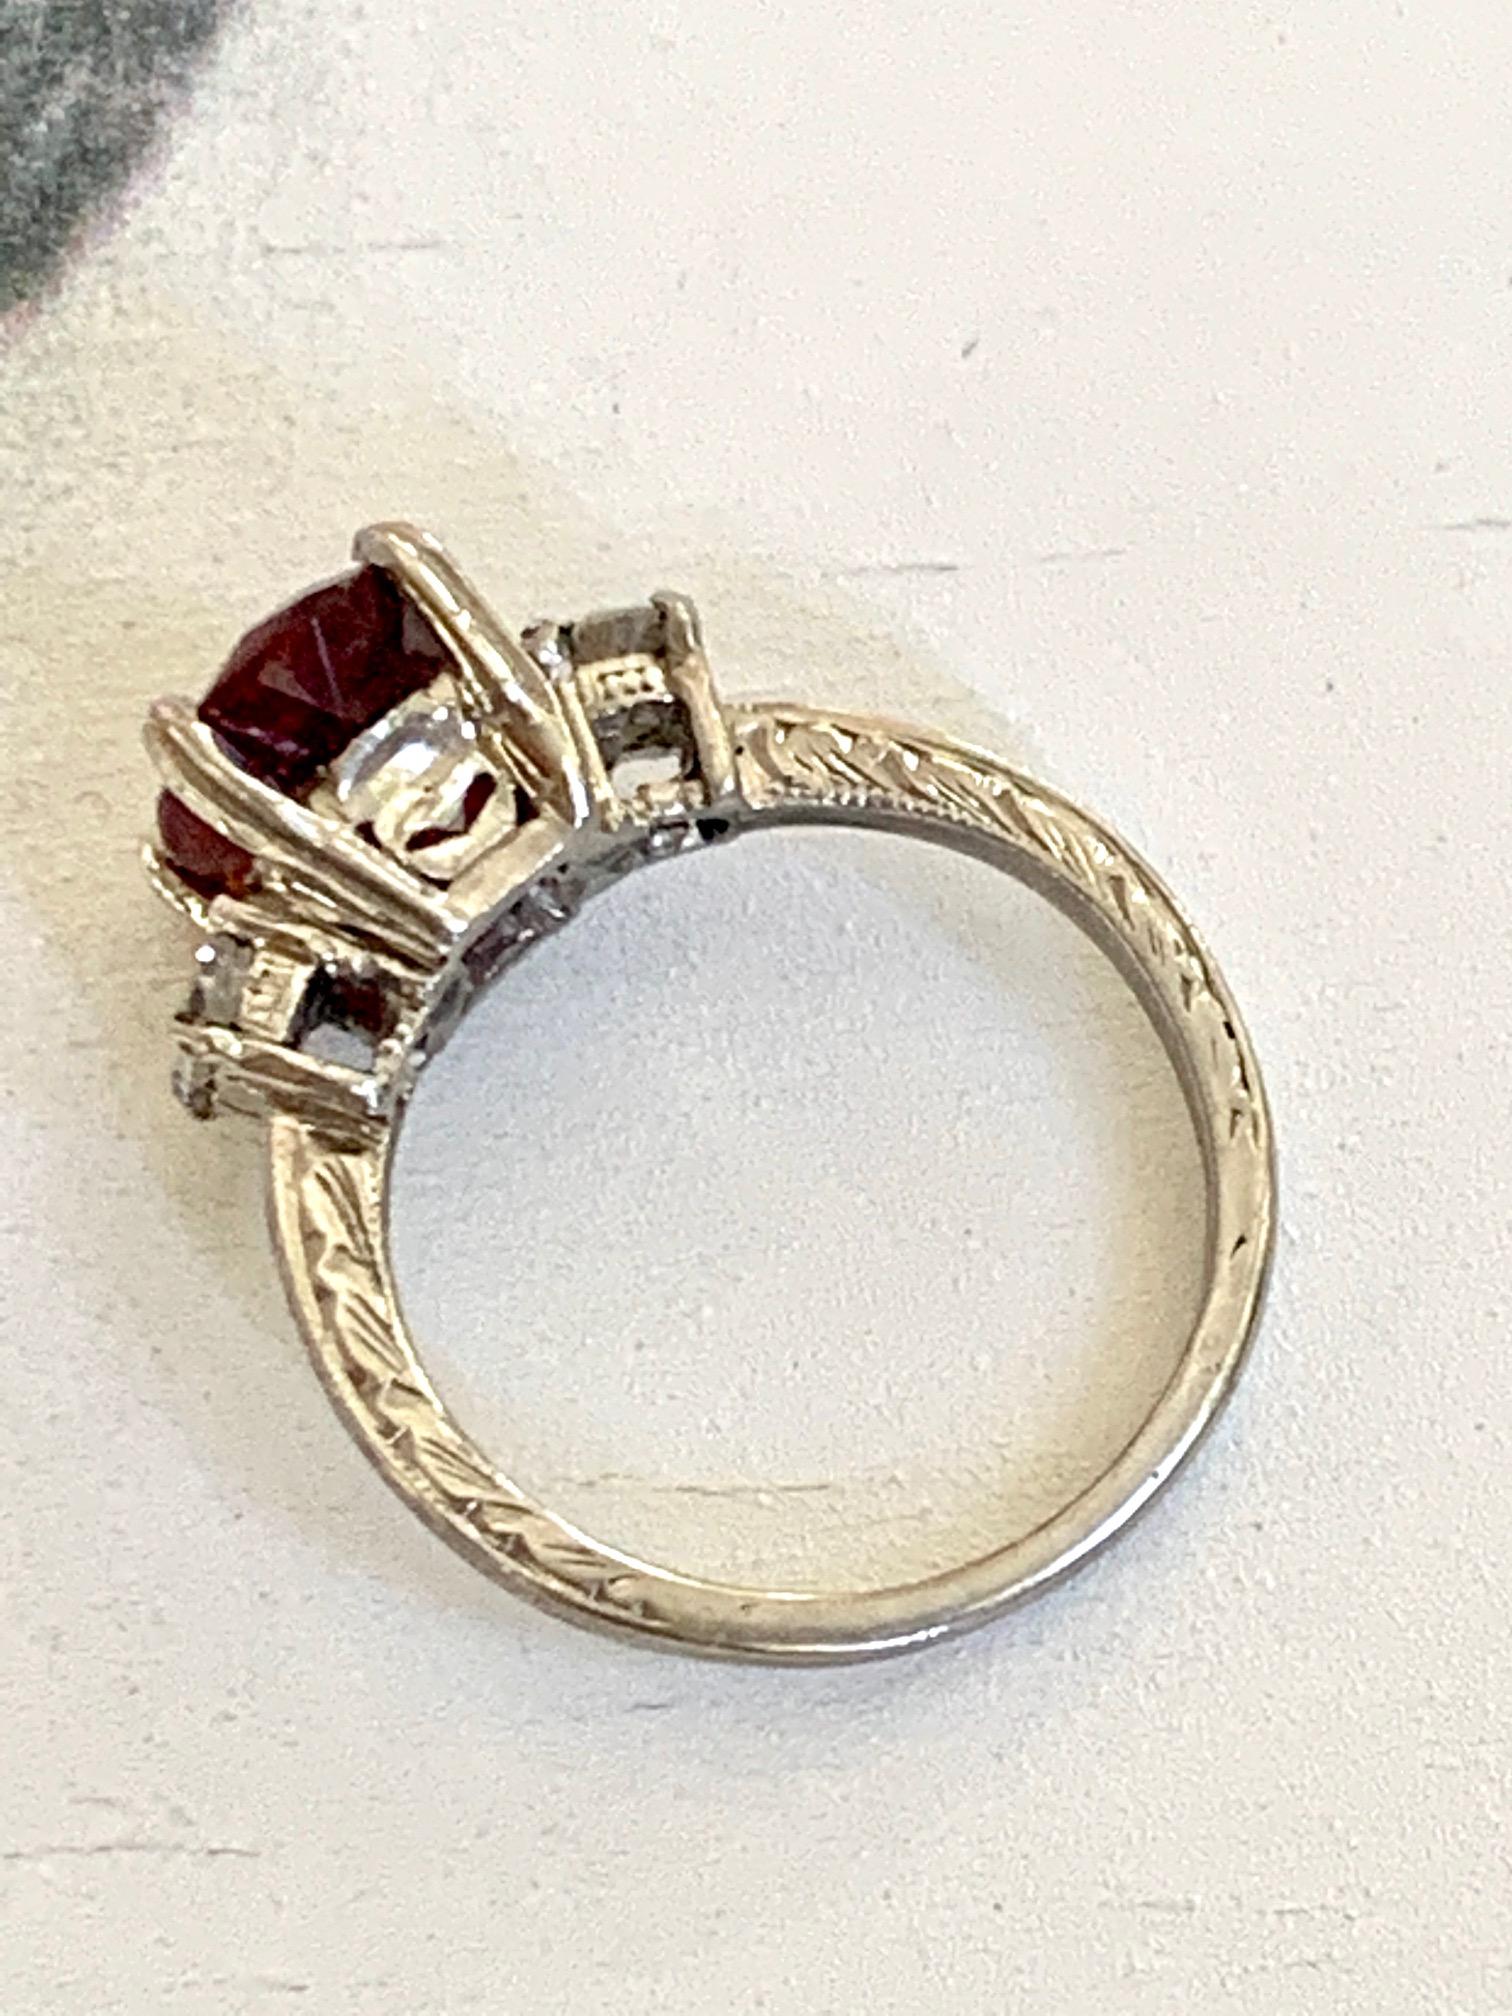 This beautiful Tacori ring features a red faceted Rubellite Tourmaline center stone, accented by two 3.5mm Brilliant cut side Diamonds totaling approximately .35 ctw. Clarity and color: SI(1)-G. 

The Rubellite stone measures 9mm x 7mm and is